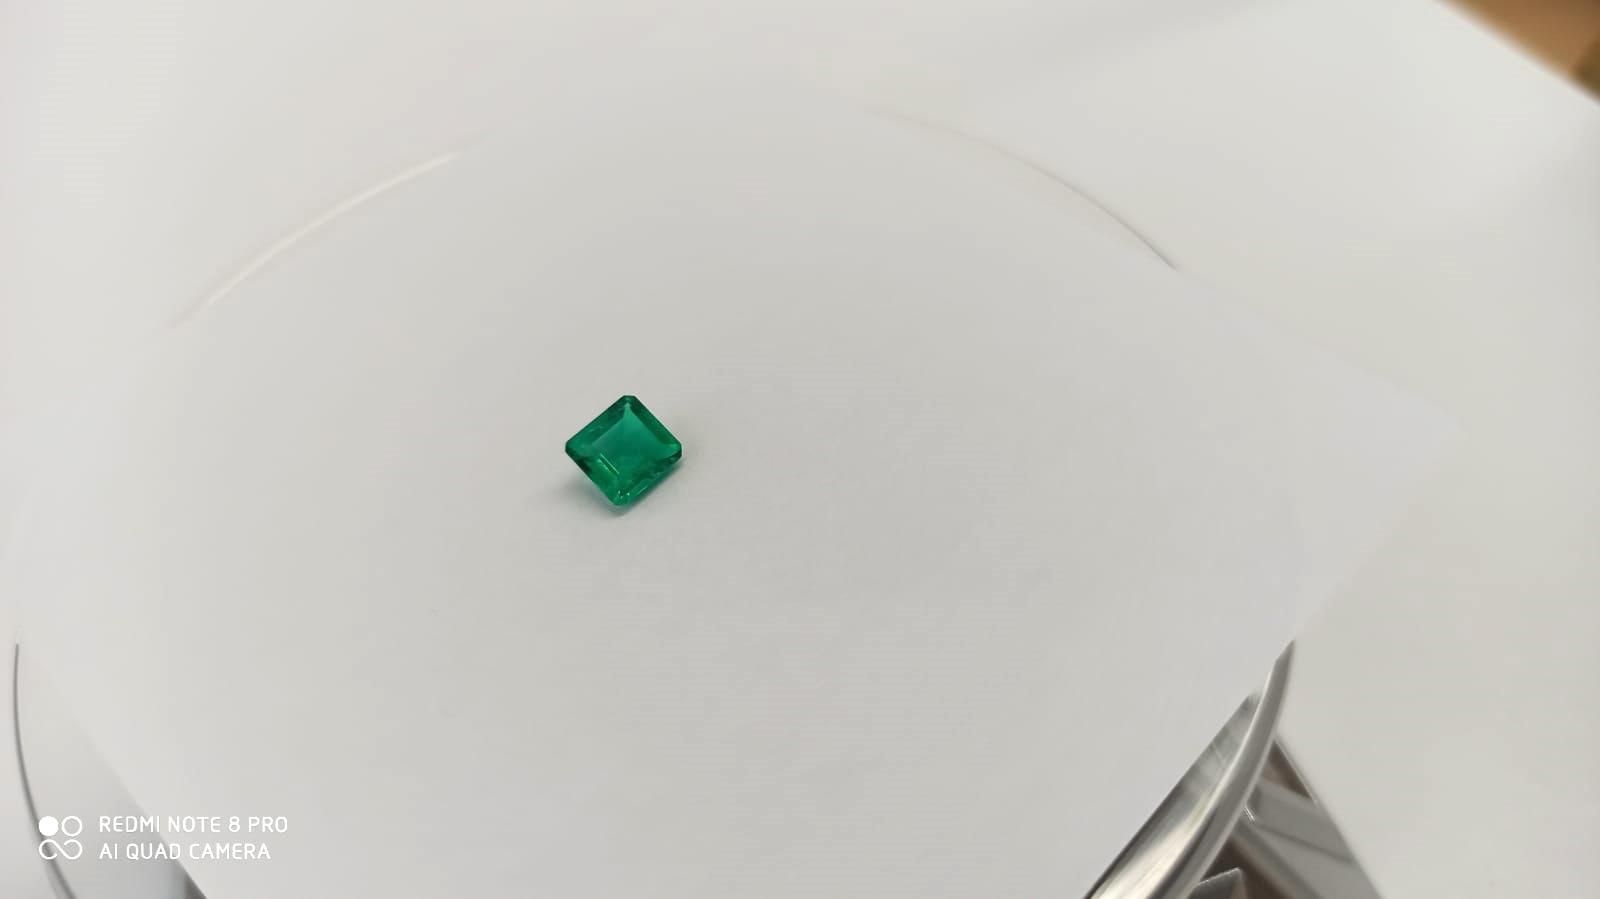 0.90 ct. Colombian Emerald 